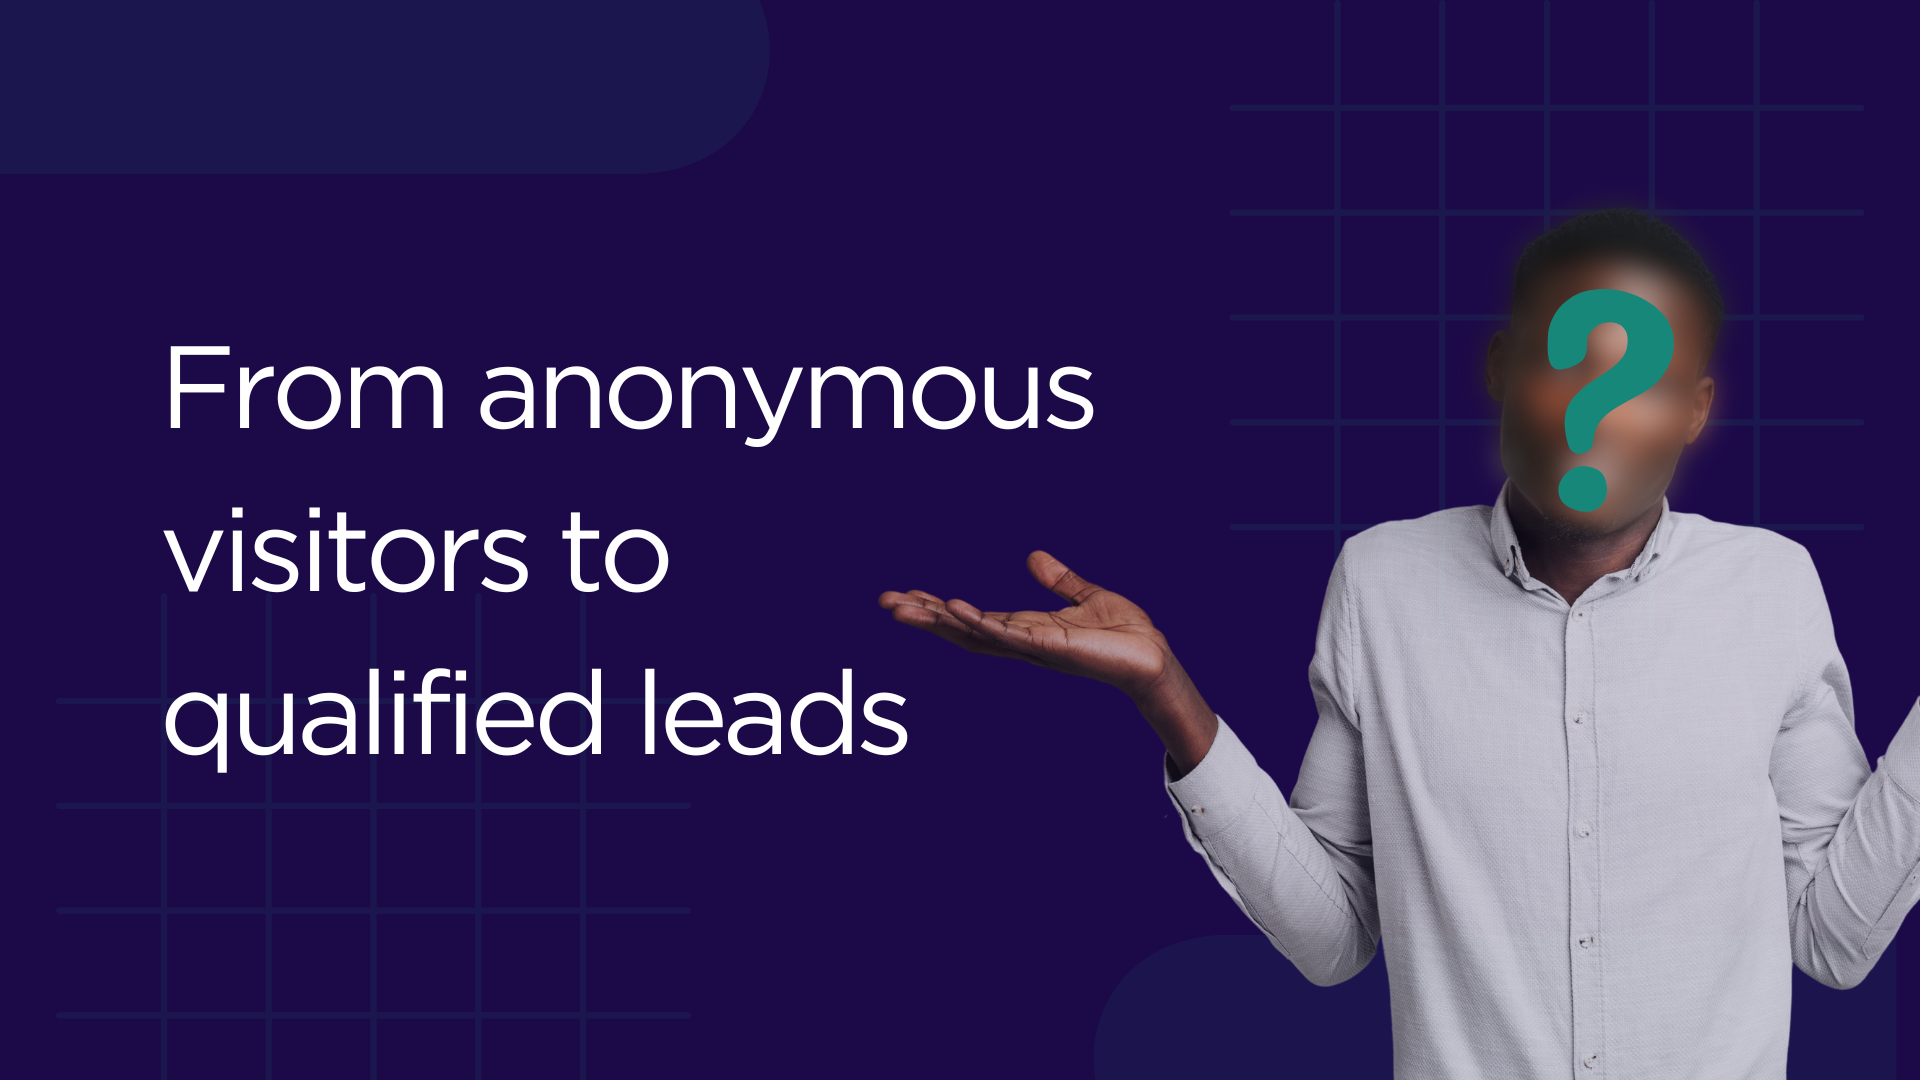 From anonymous visitors to qualified leads